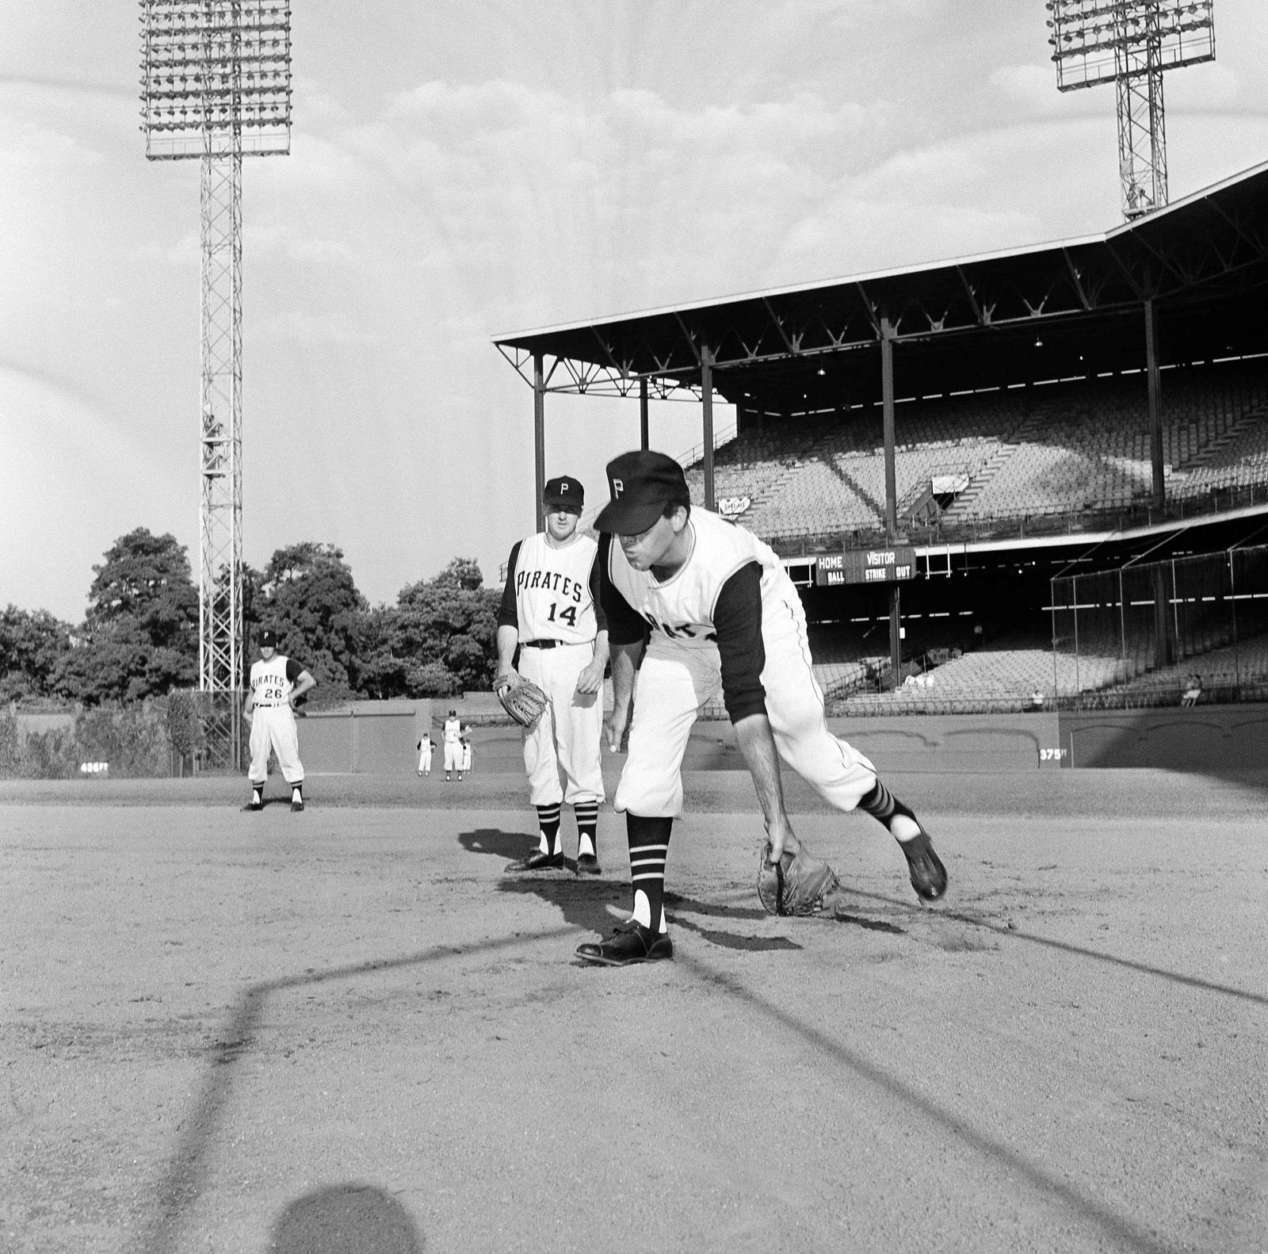 Comedian Jerry Lewis works out at first base prior to Pittsburgh-Houston ballgame at Forbes Field on July 13, 1962 in Pittsburgh.    Watching his antics is Pittsburgh's first baseman Jim Marshall. (AP Photo)